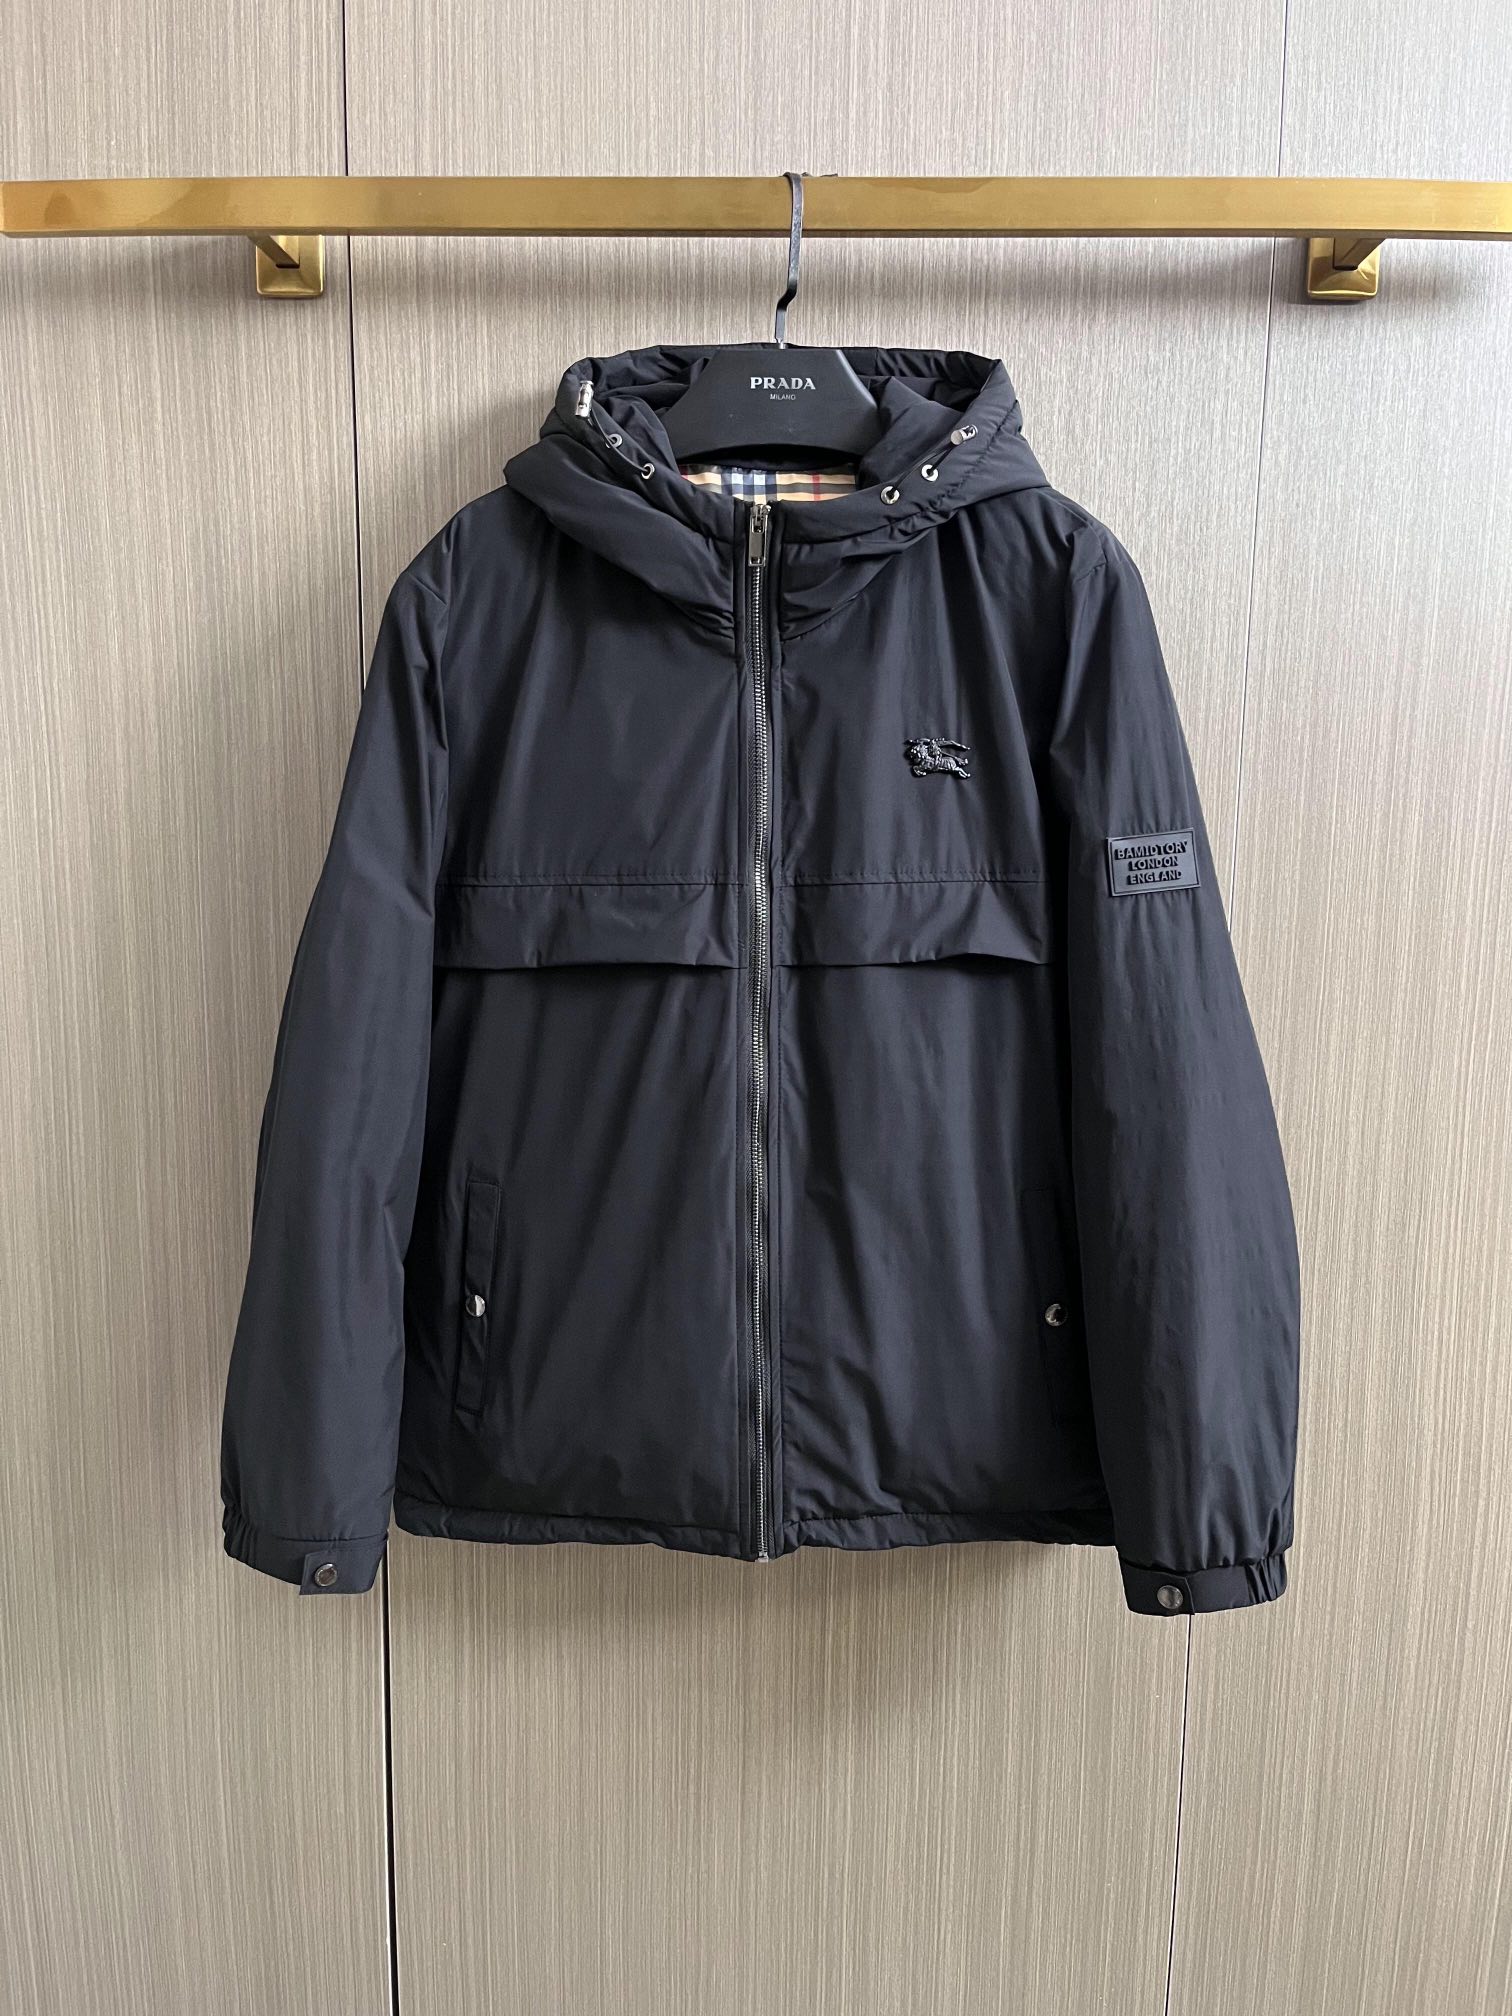 Burberry Clothing Coats & Jackets Cotton Winter Collection